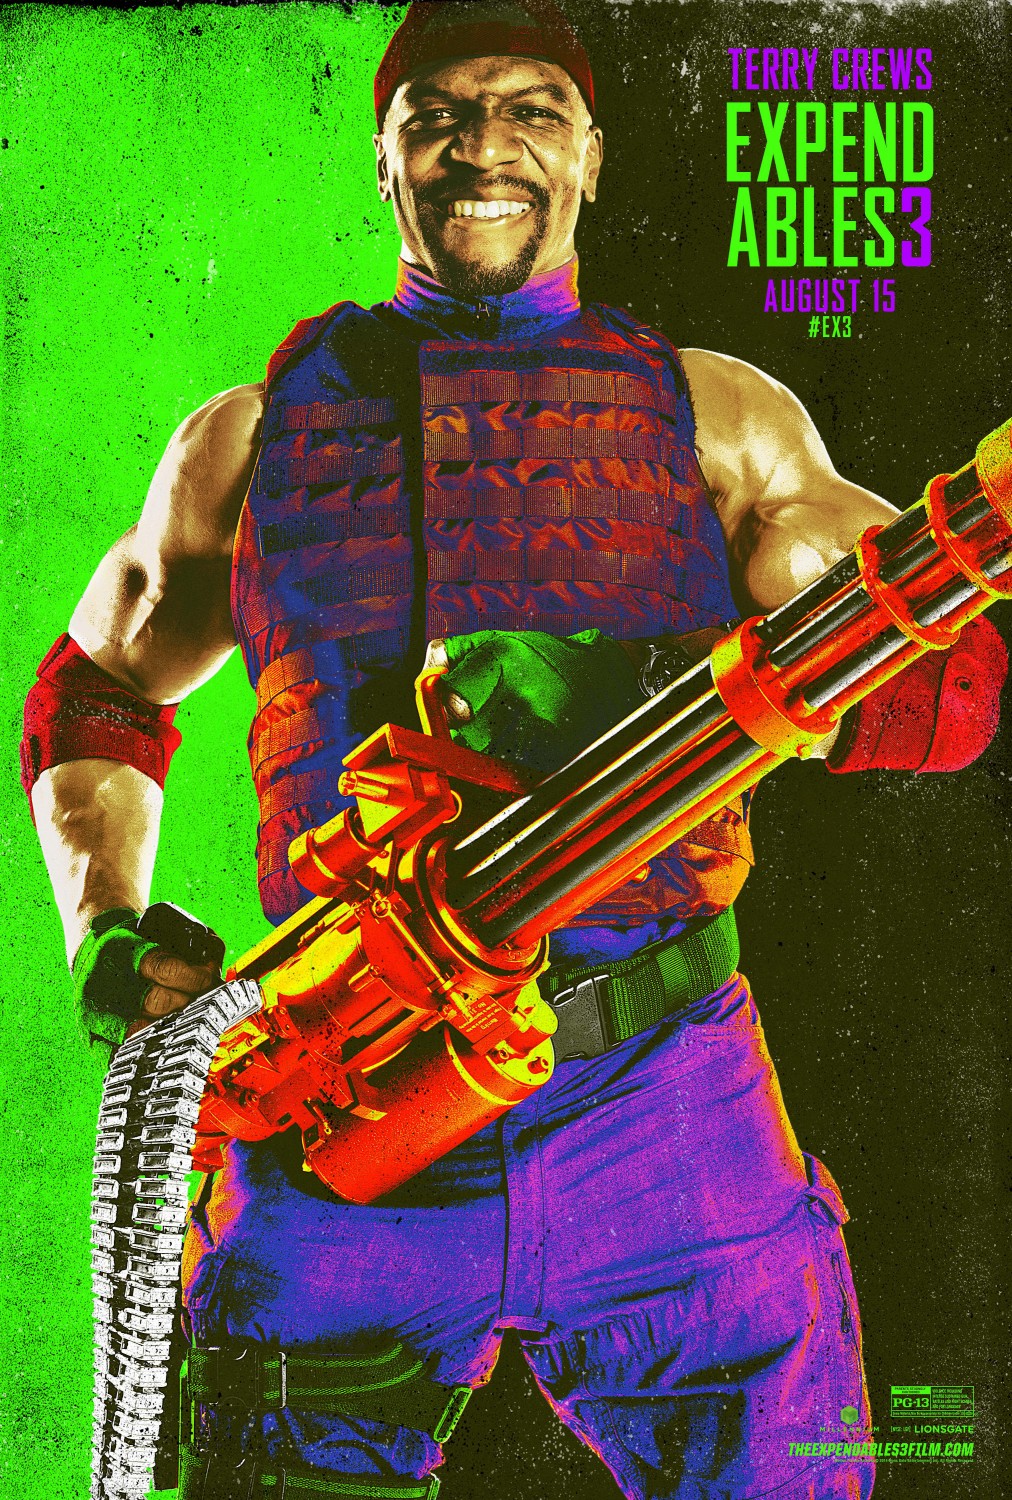 Extra Large Movie Poster Image for The Expendables 3 (#25 of 39)